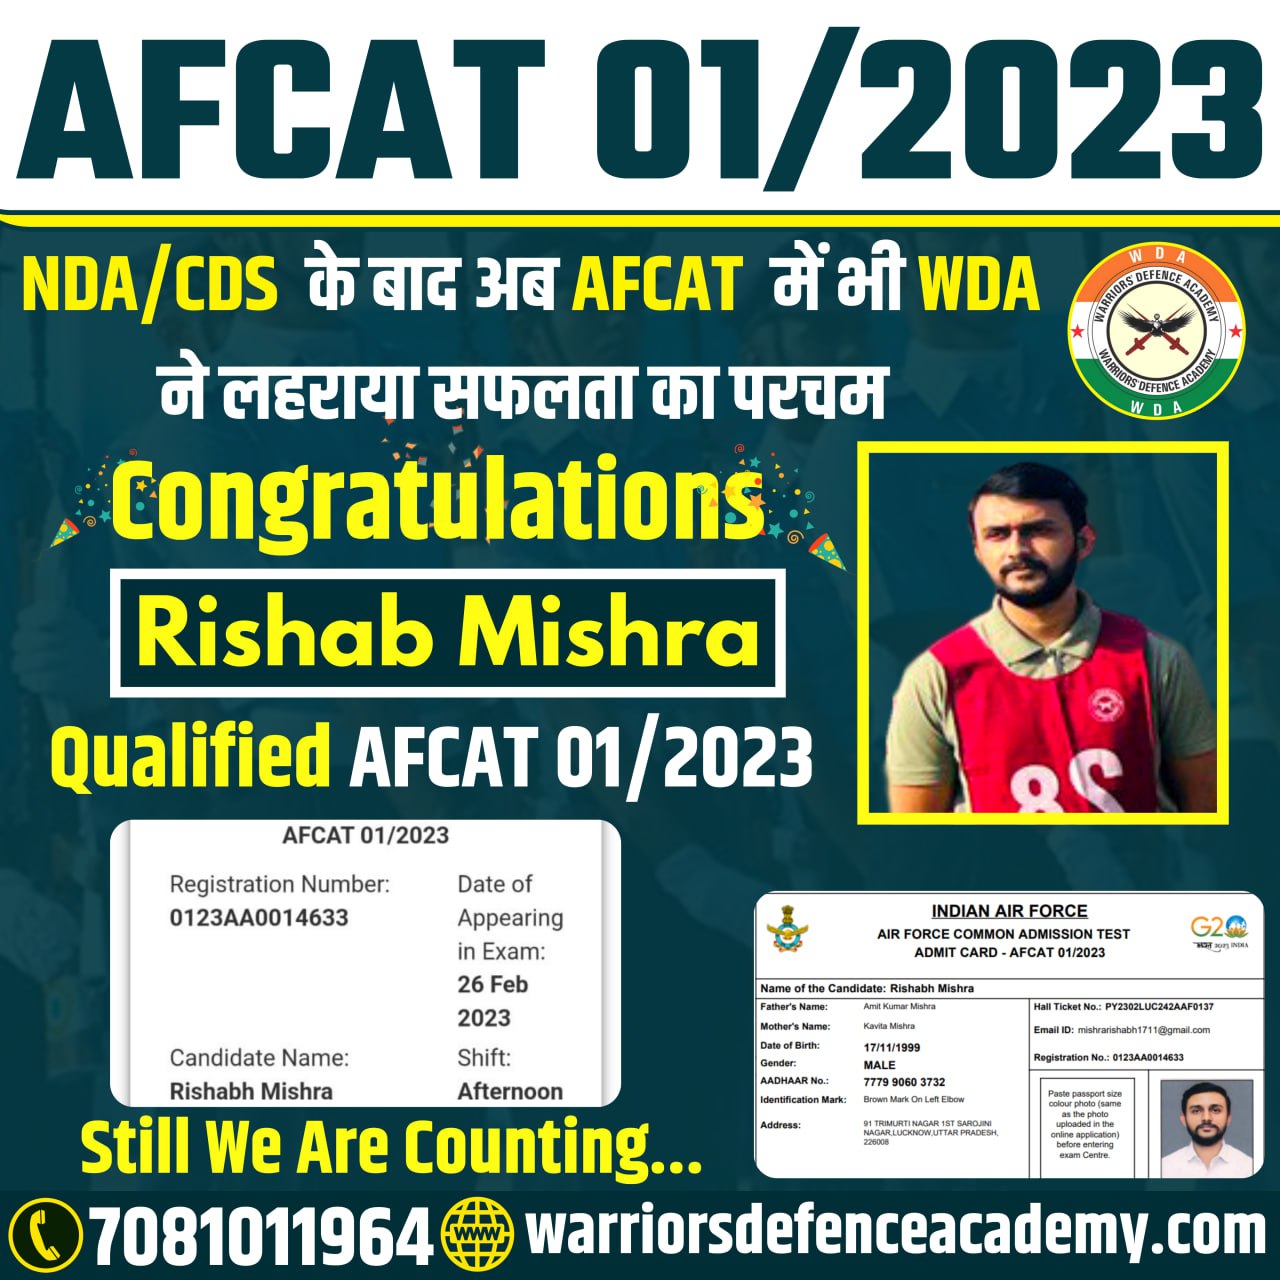 Indian's No-1 NDA Coaching in Lucknow UP, India | Warriors Defence Academy | Best NDA Coaching in Lucknow | Warriors Defence Academy | Best NDA Coaching in Lucknow